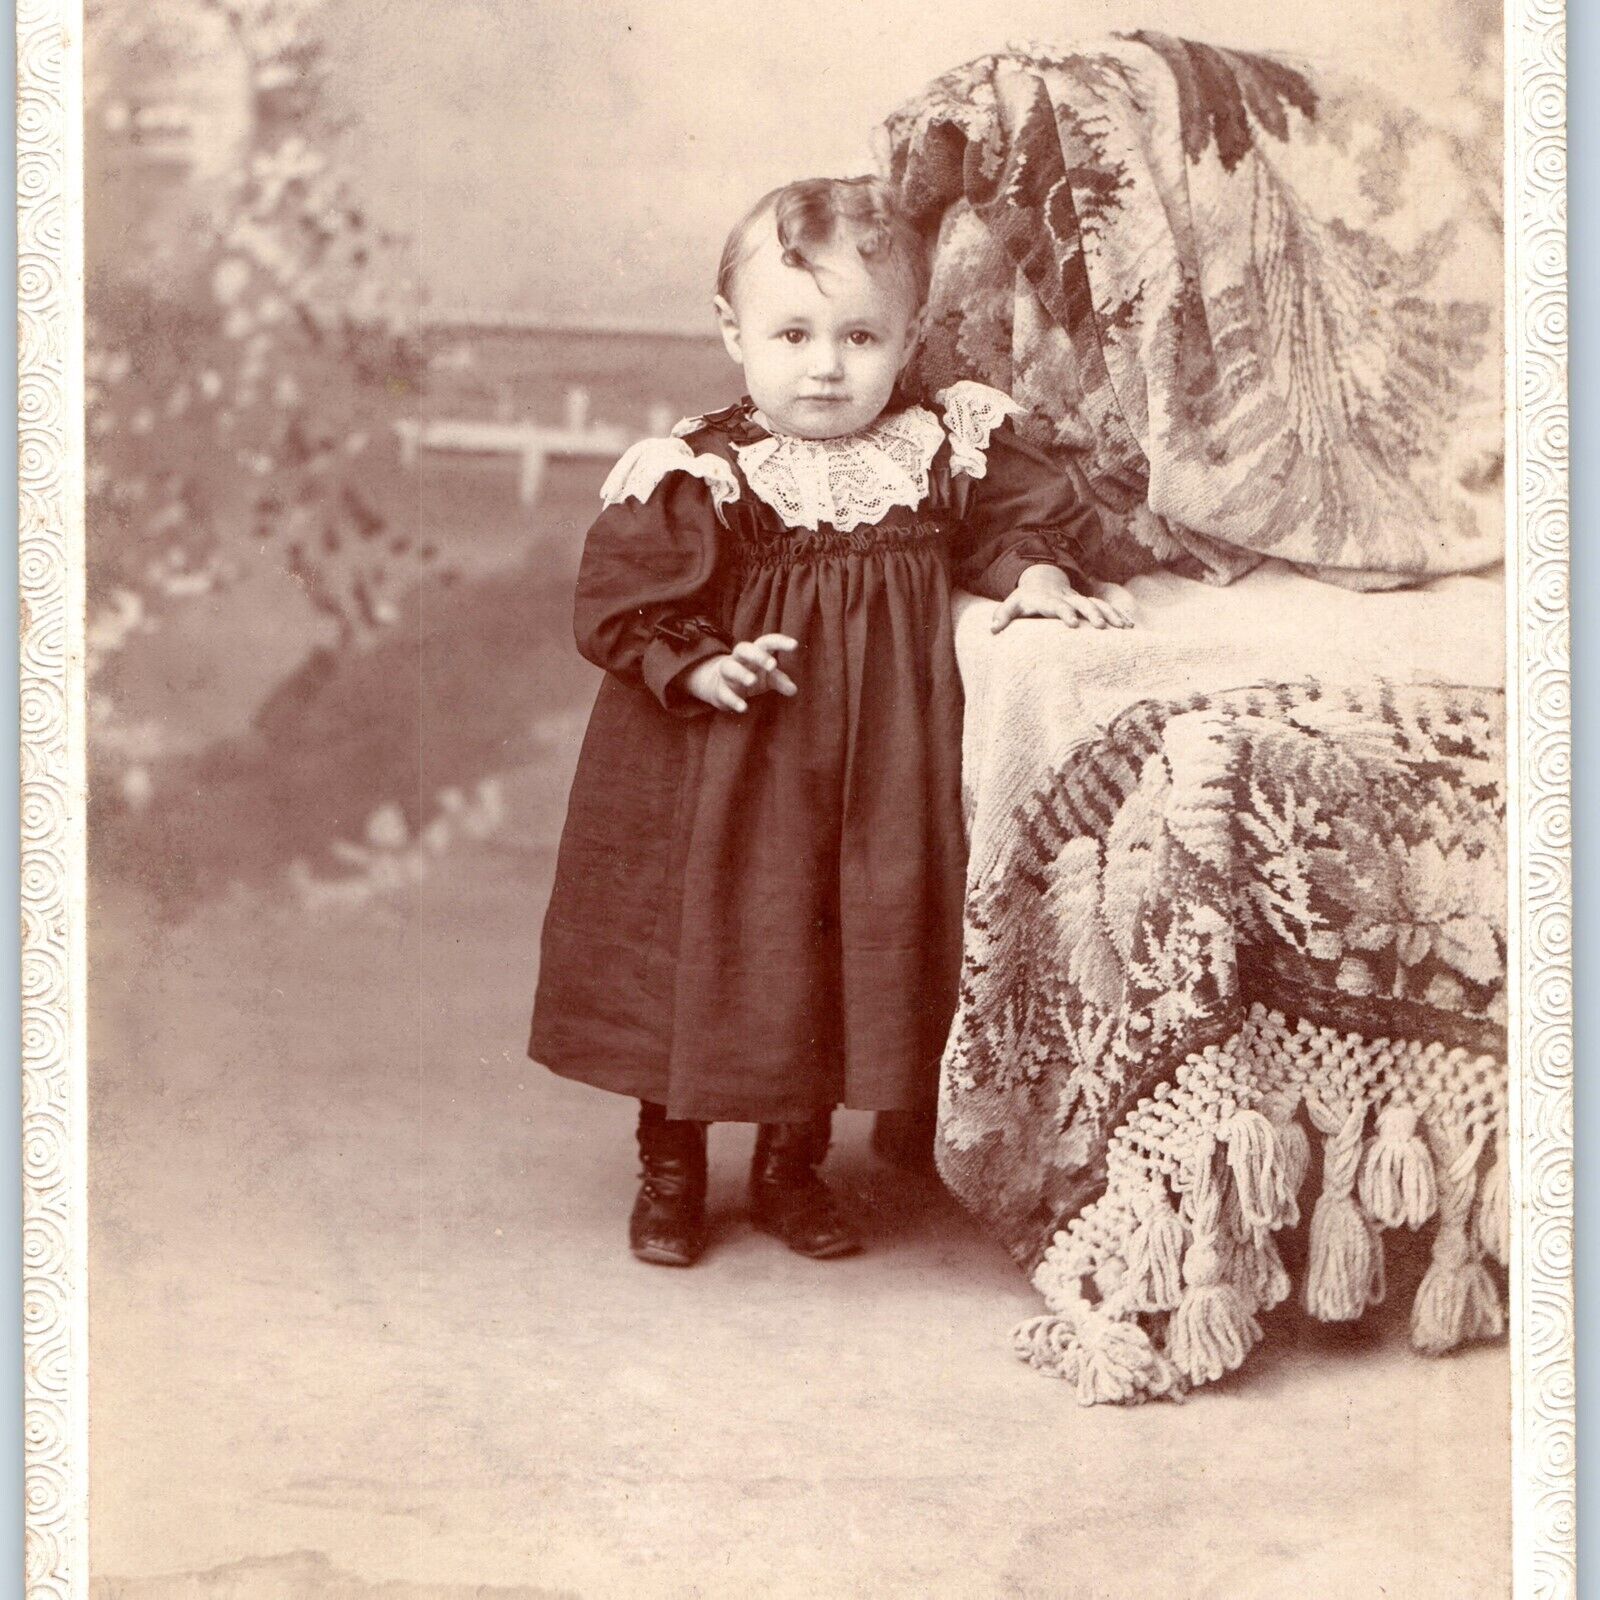 c1880s Allentown, PA Adorable Little Girl Funny Baby Hair Cabinet Card Photo B14